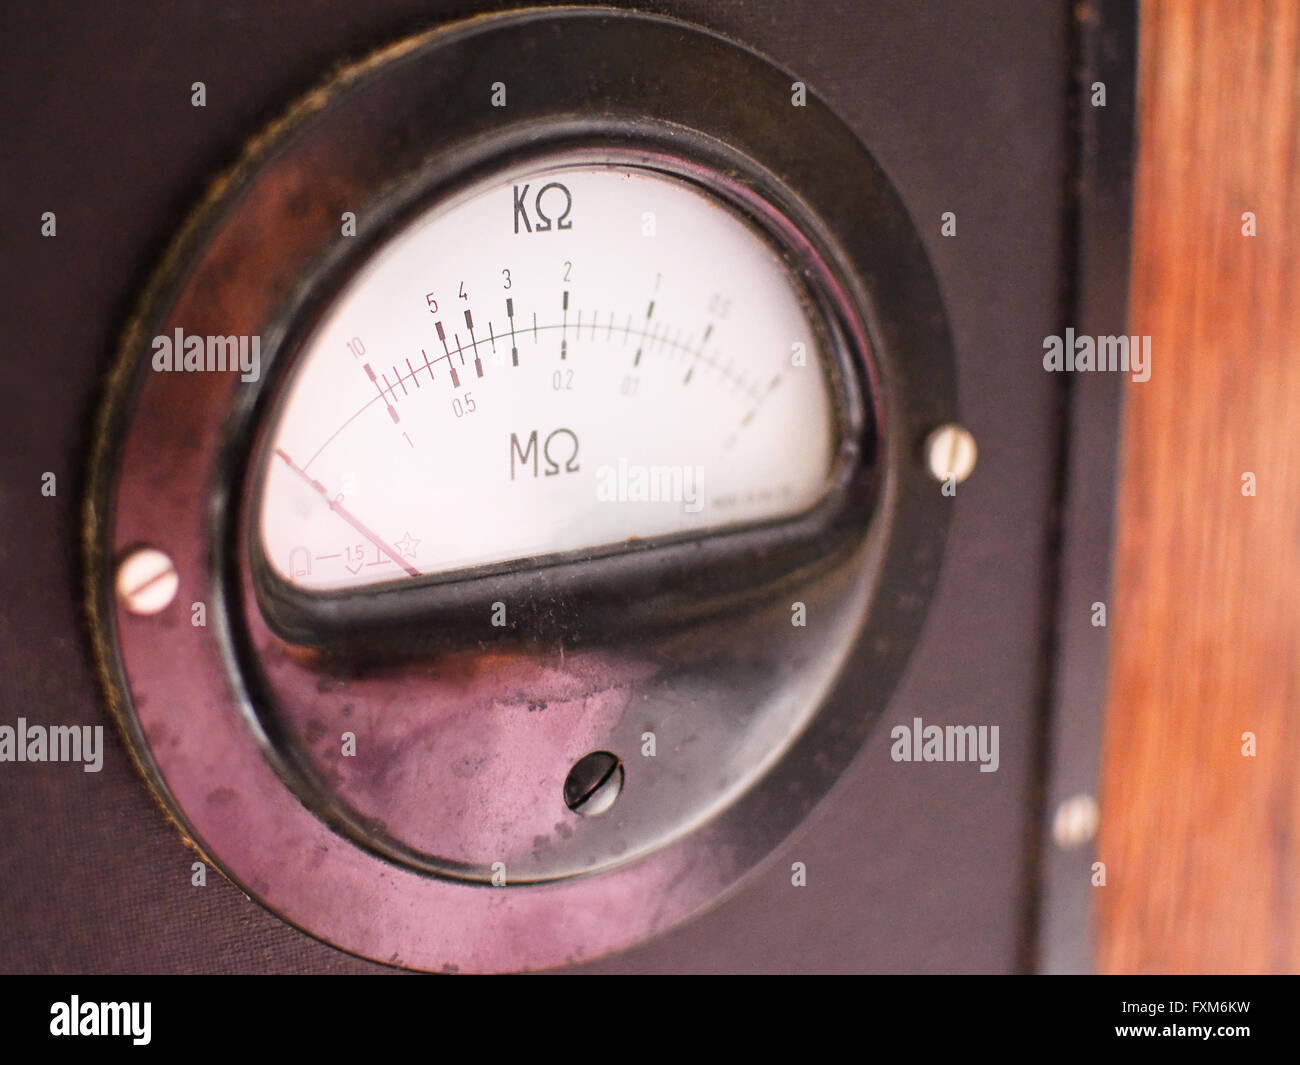 old meter resistance blurred Stock Photo